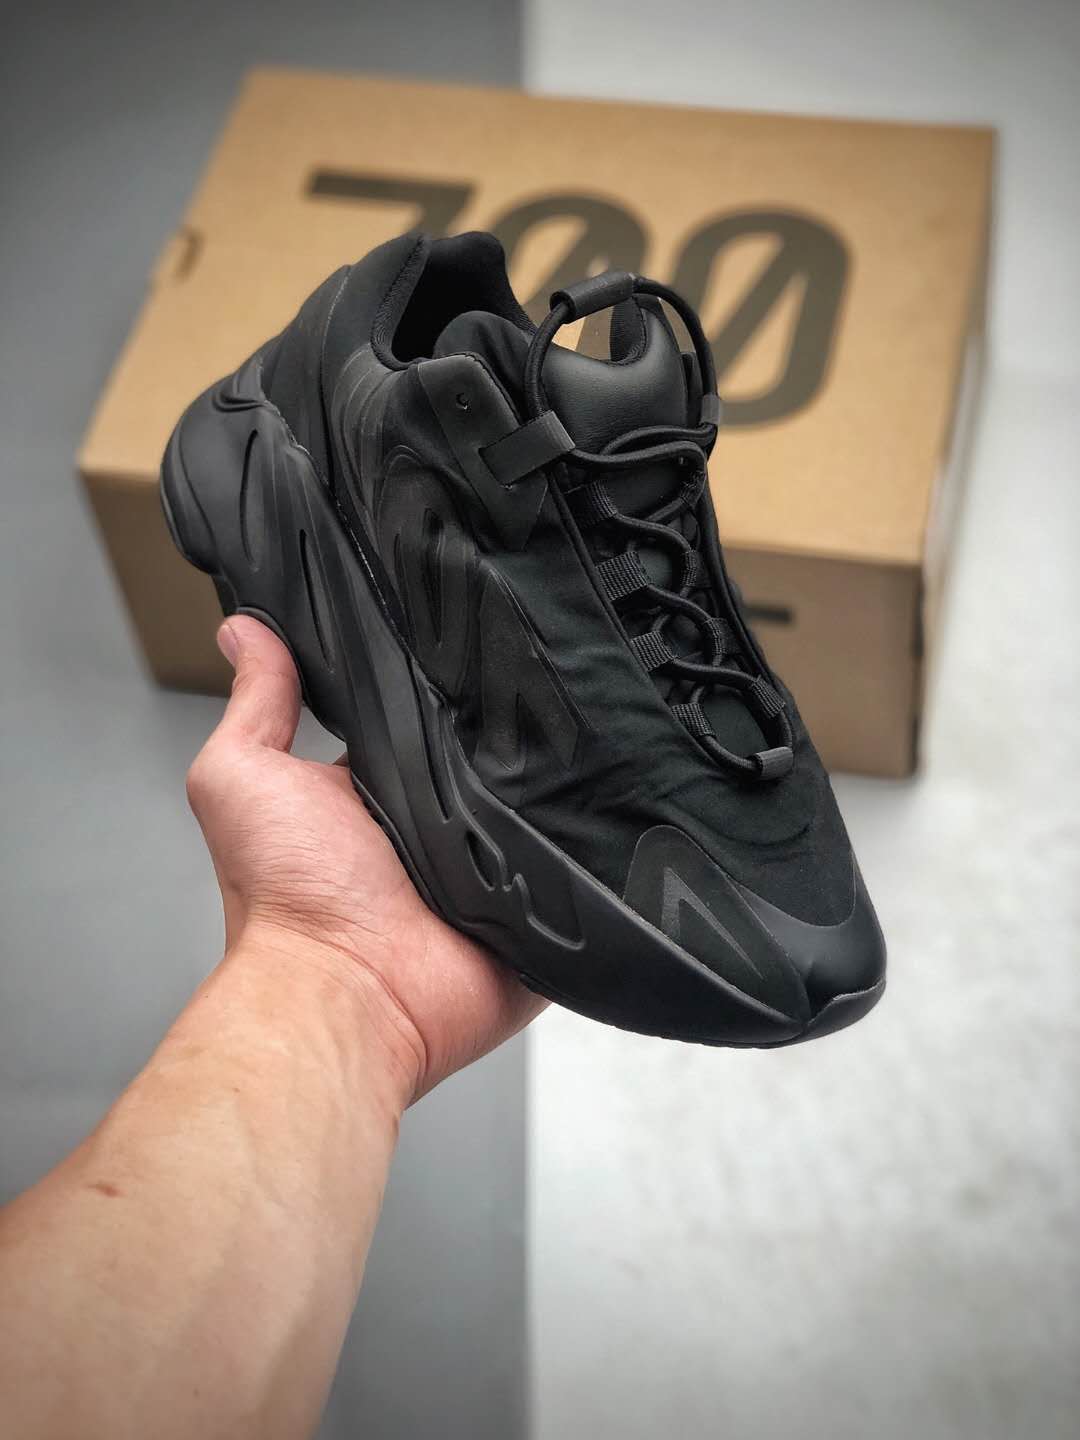 Adidas Yeezy Boost 700 MNVN Triple Black FV4440 - Iconic Style & Unmatched Comfort